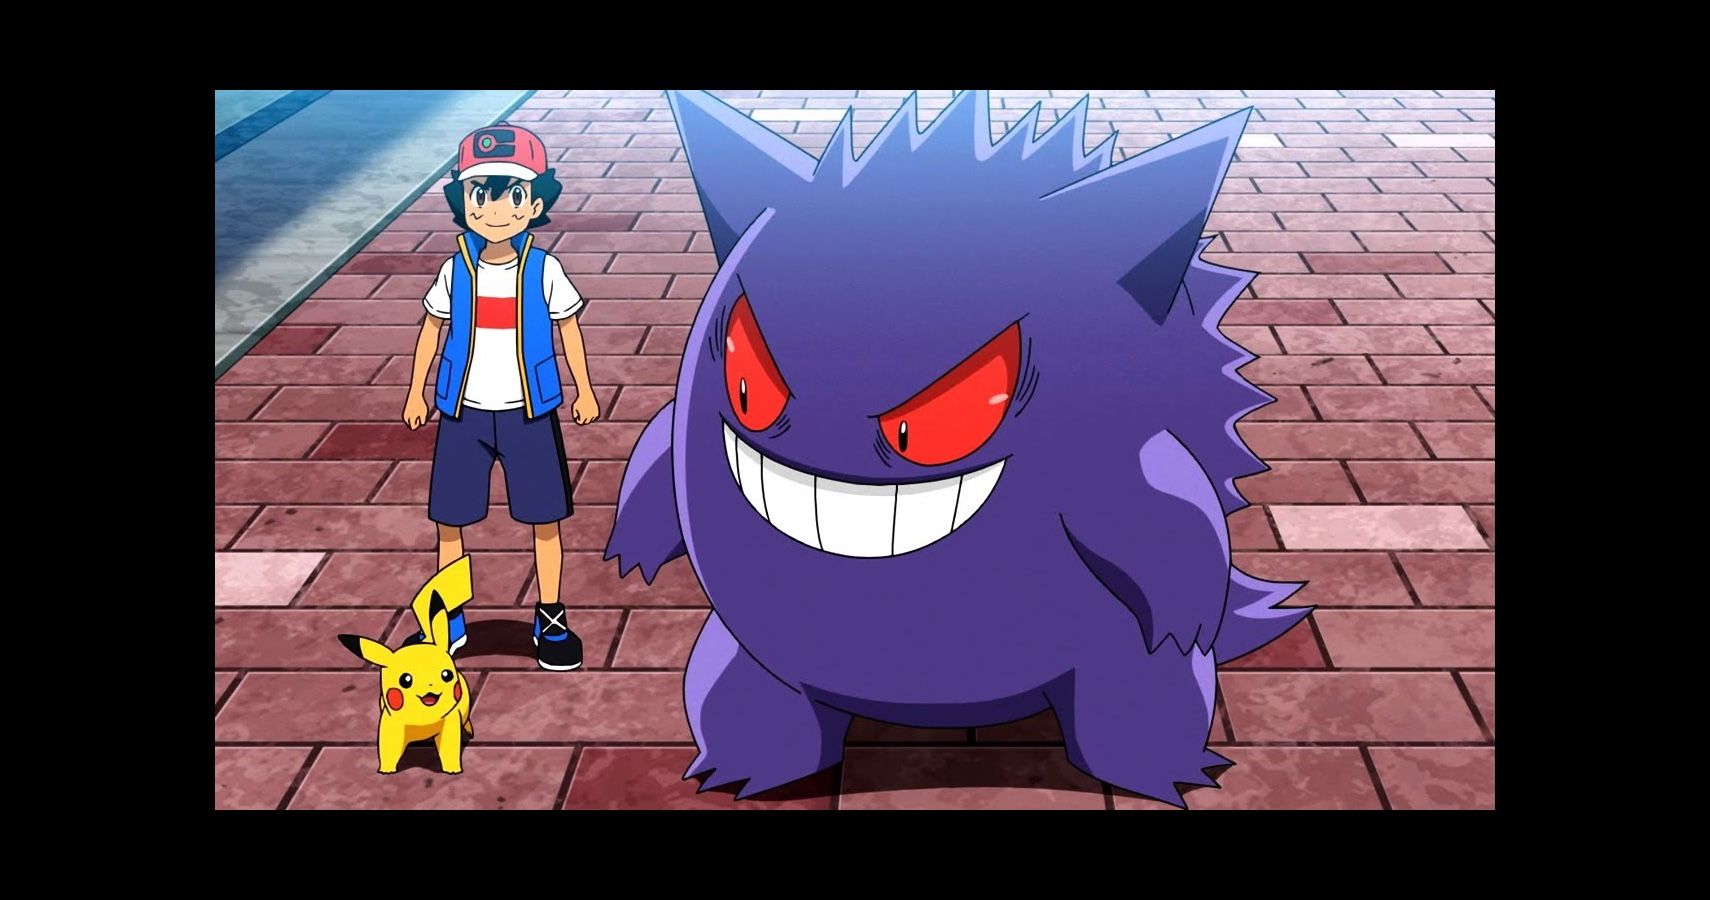 Ash, Pikachu and Gengar from the anime together.